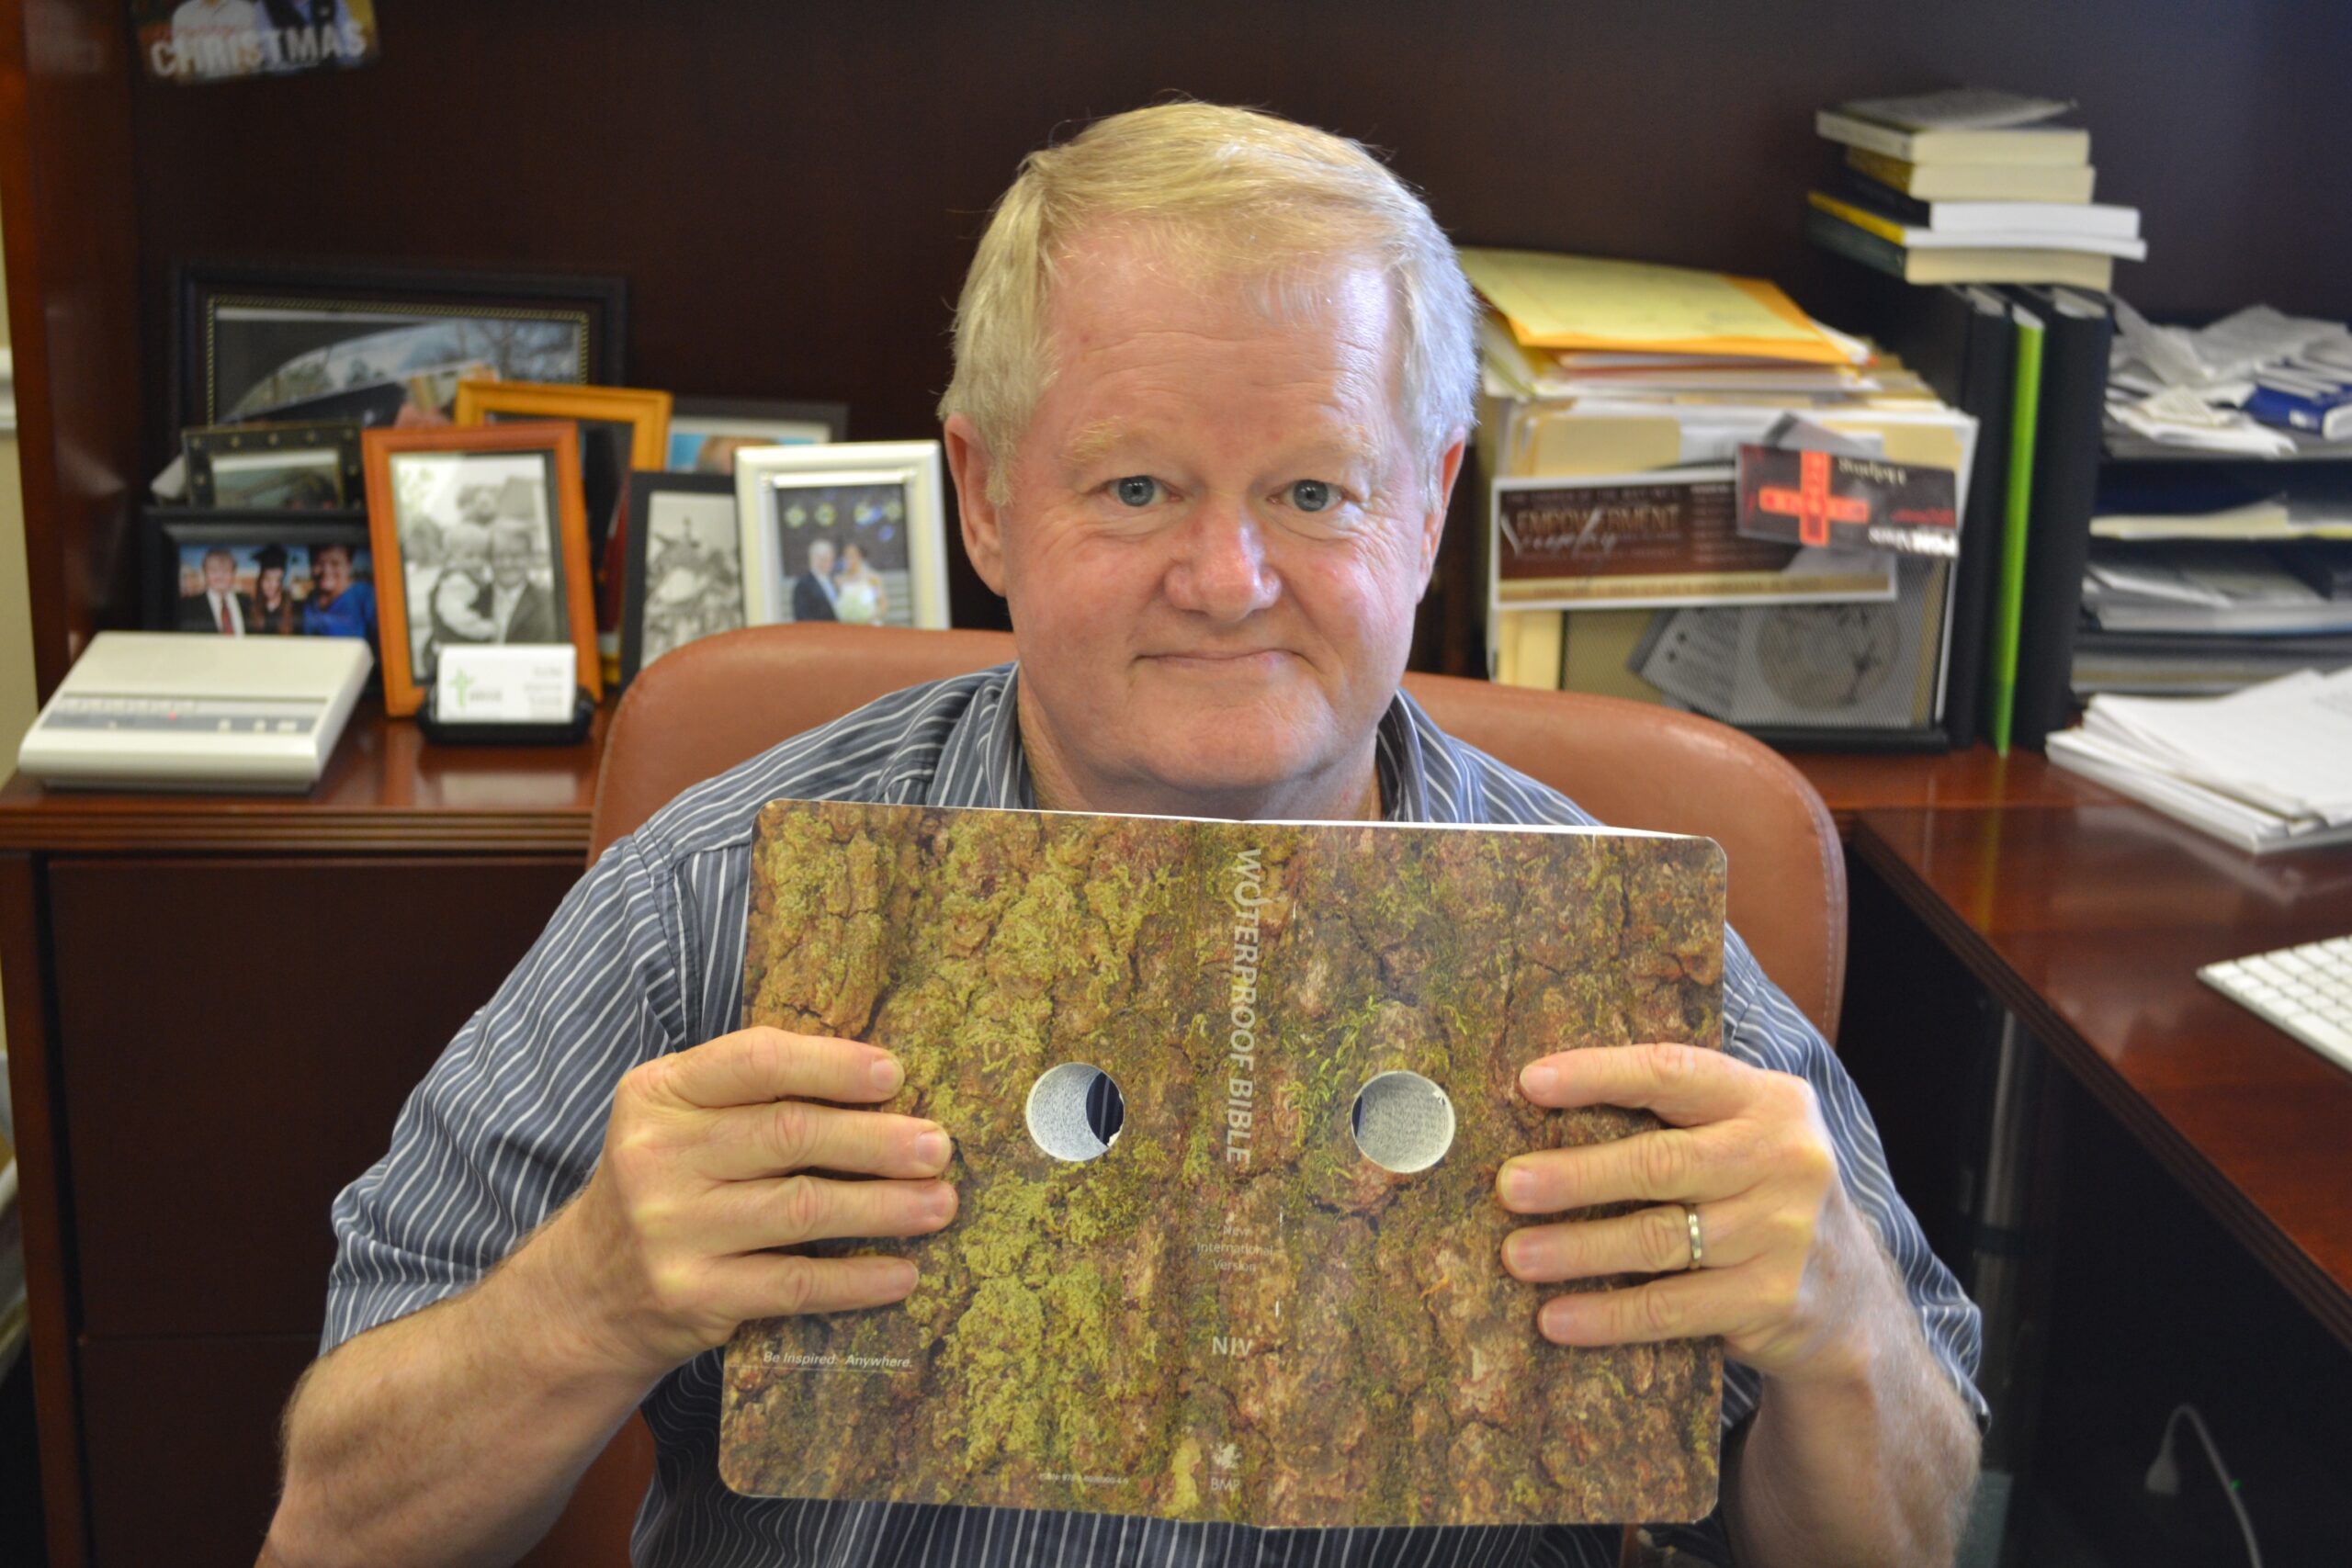 Tracy uses this Bible with eye-holes drilled in to remind him to look at the world through the lens of scripture and not through his own eyes.